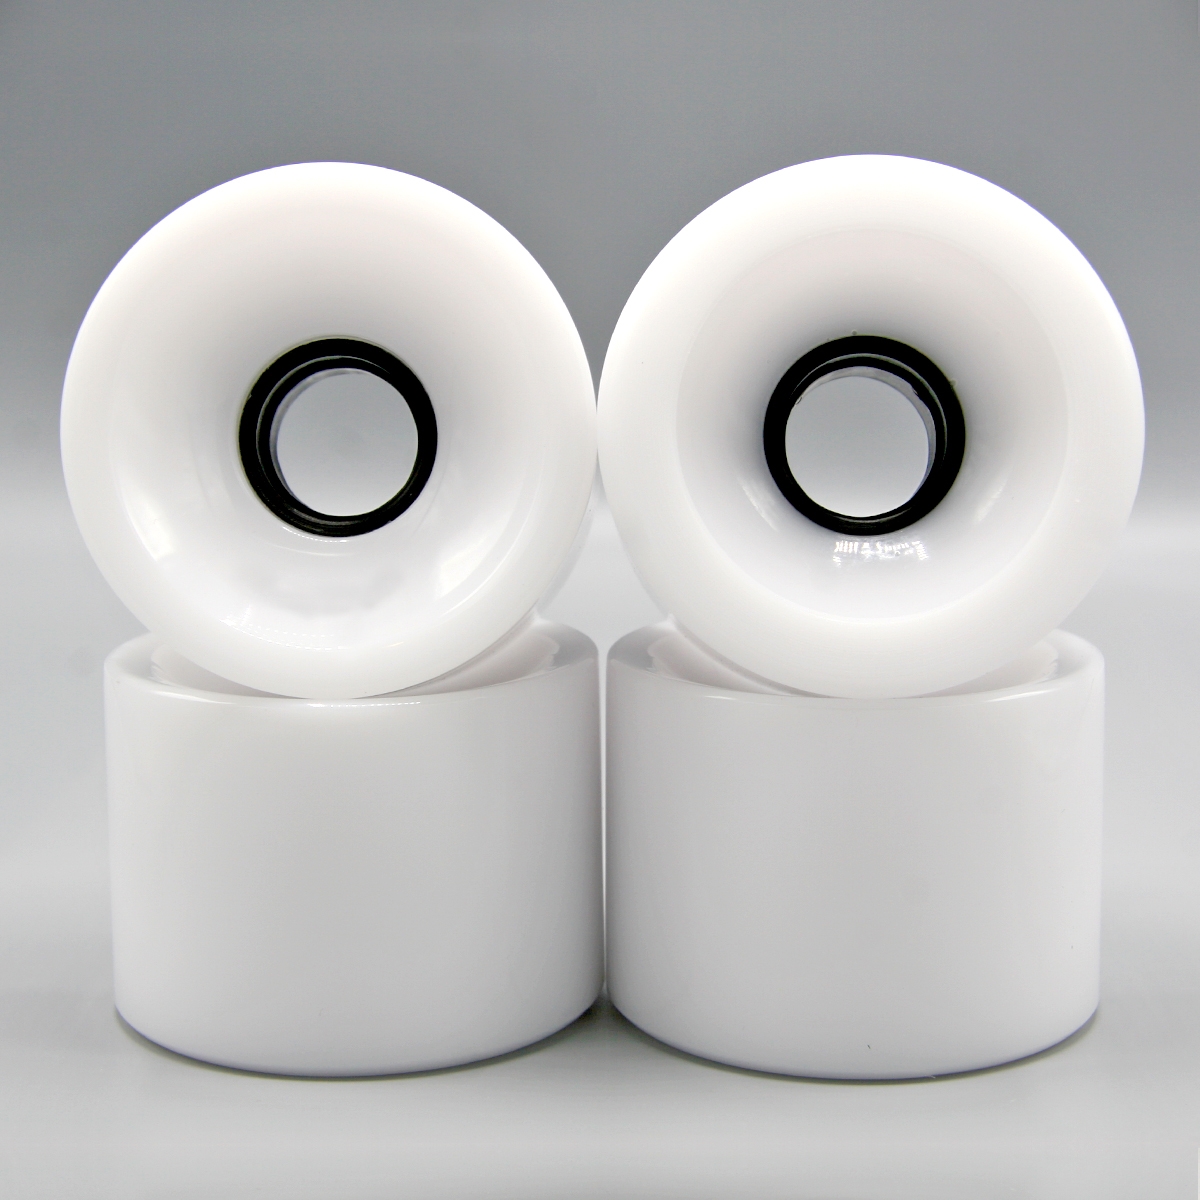 Blank 70mm (Solid White) - Includes 1/4" Risers